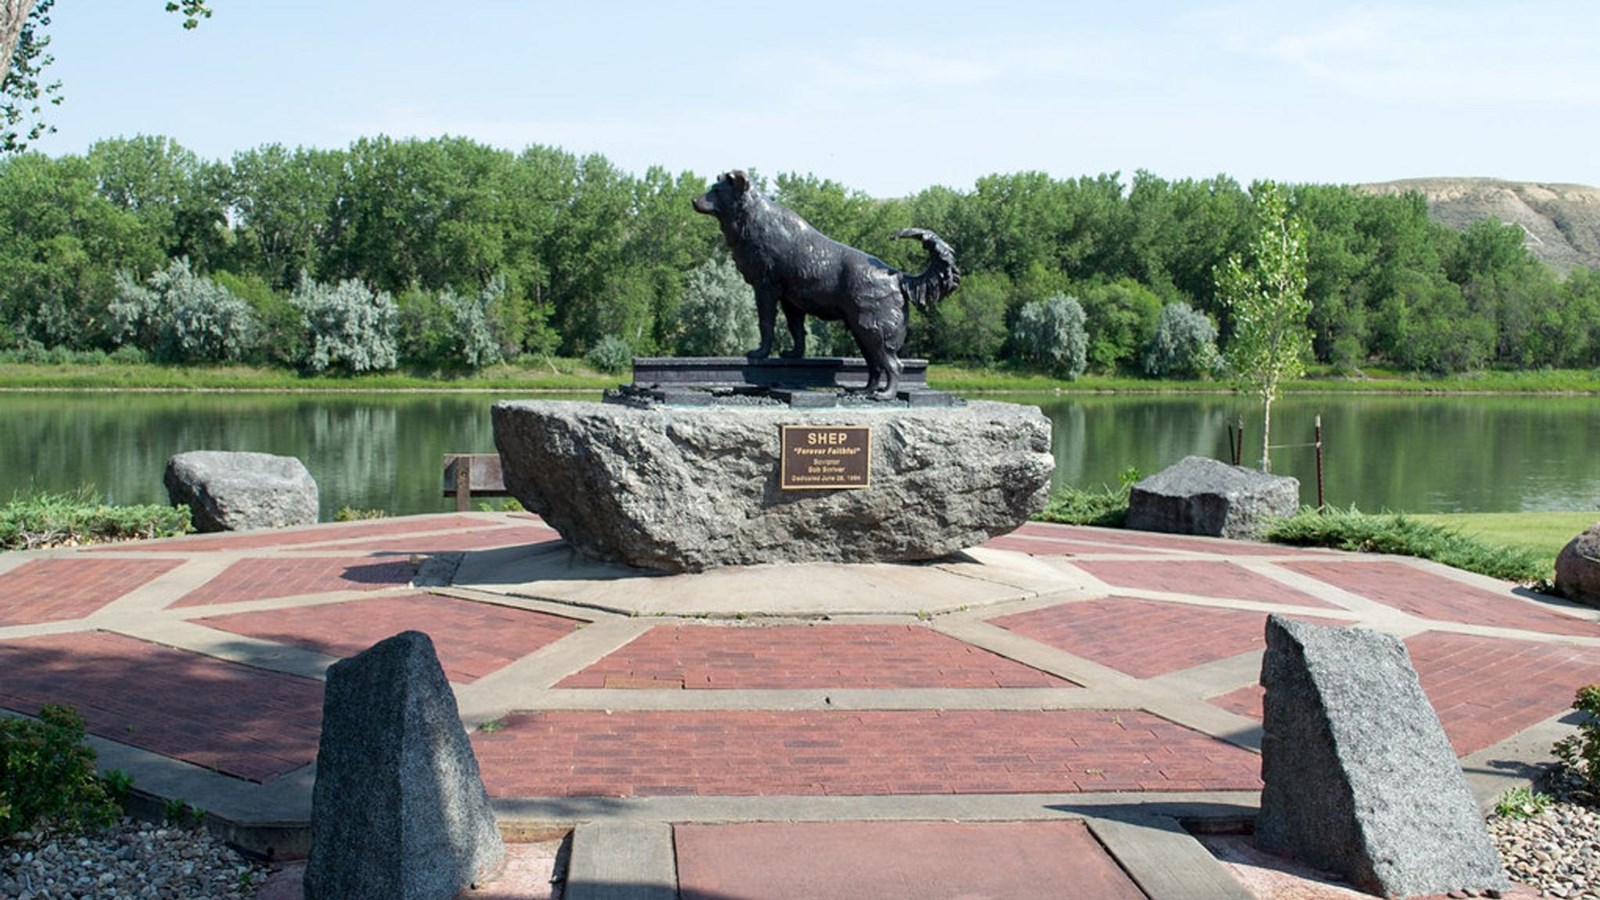 A bronze statue of a dog atop a granite block surrounded by a brick plaza